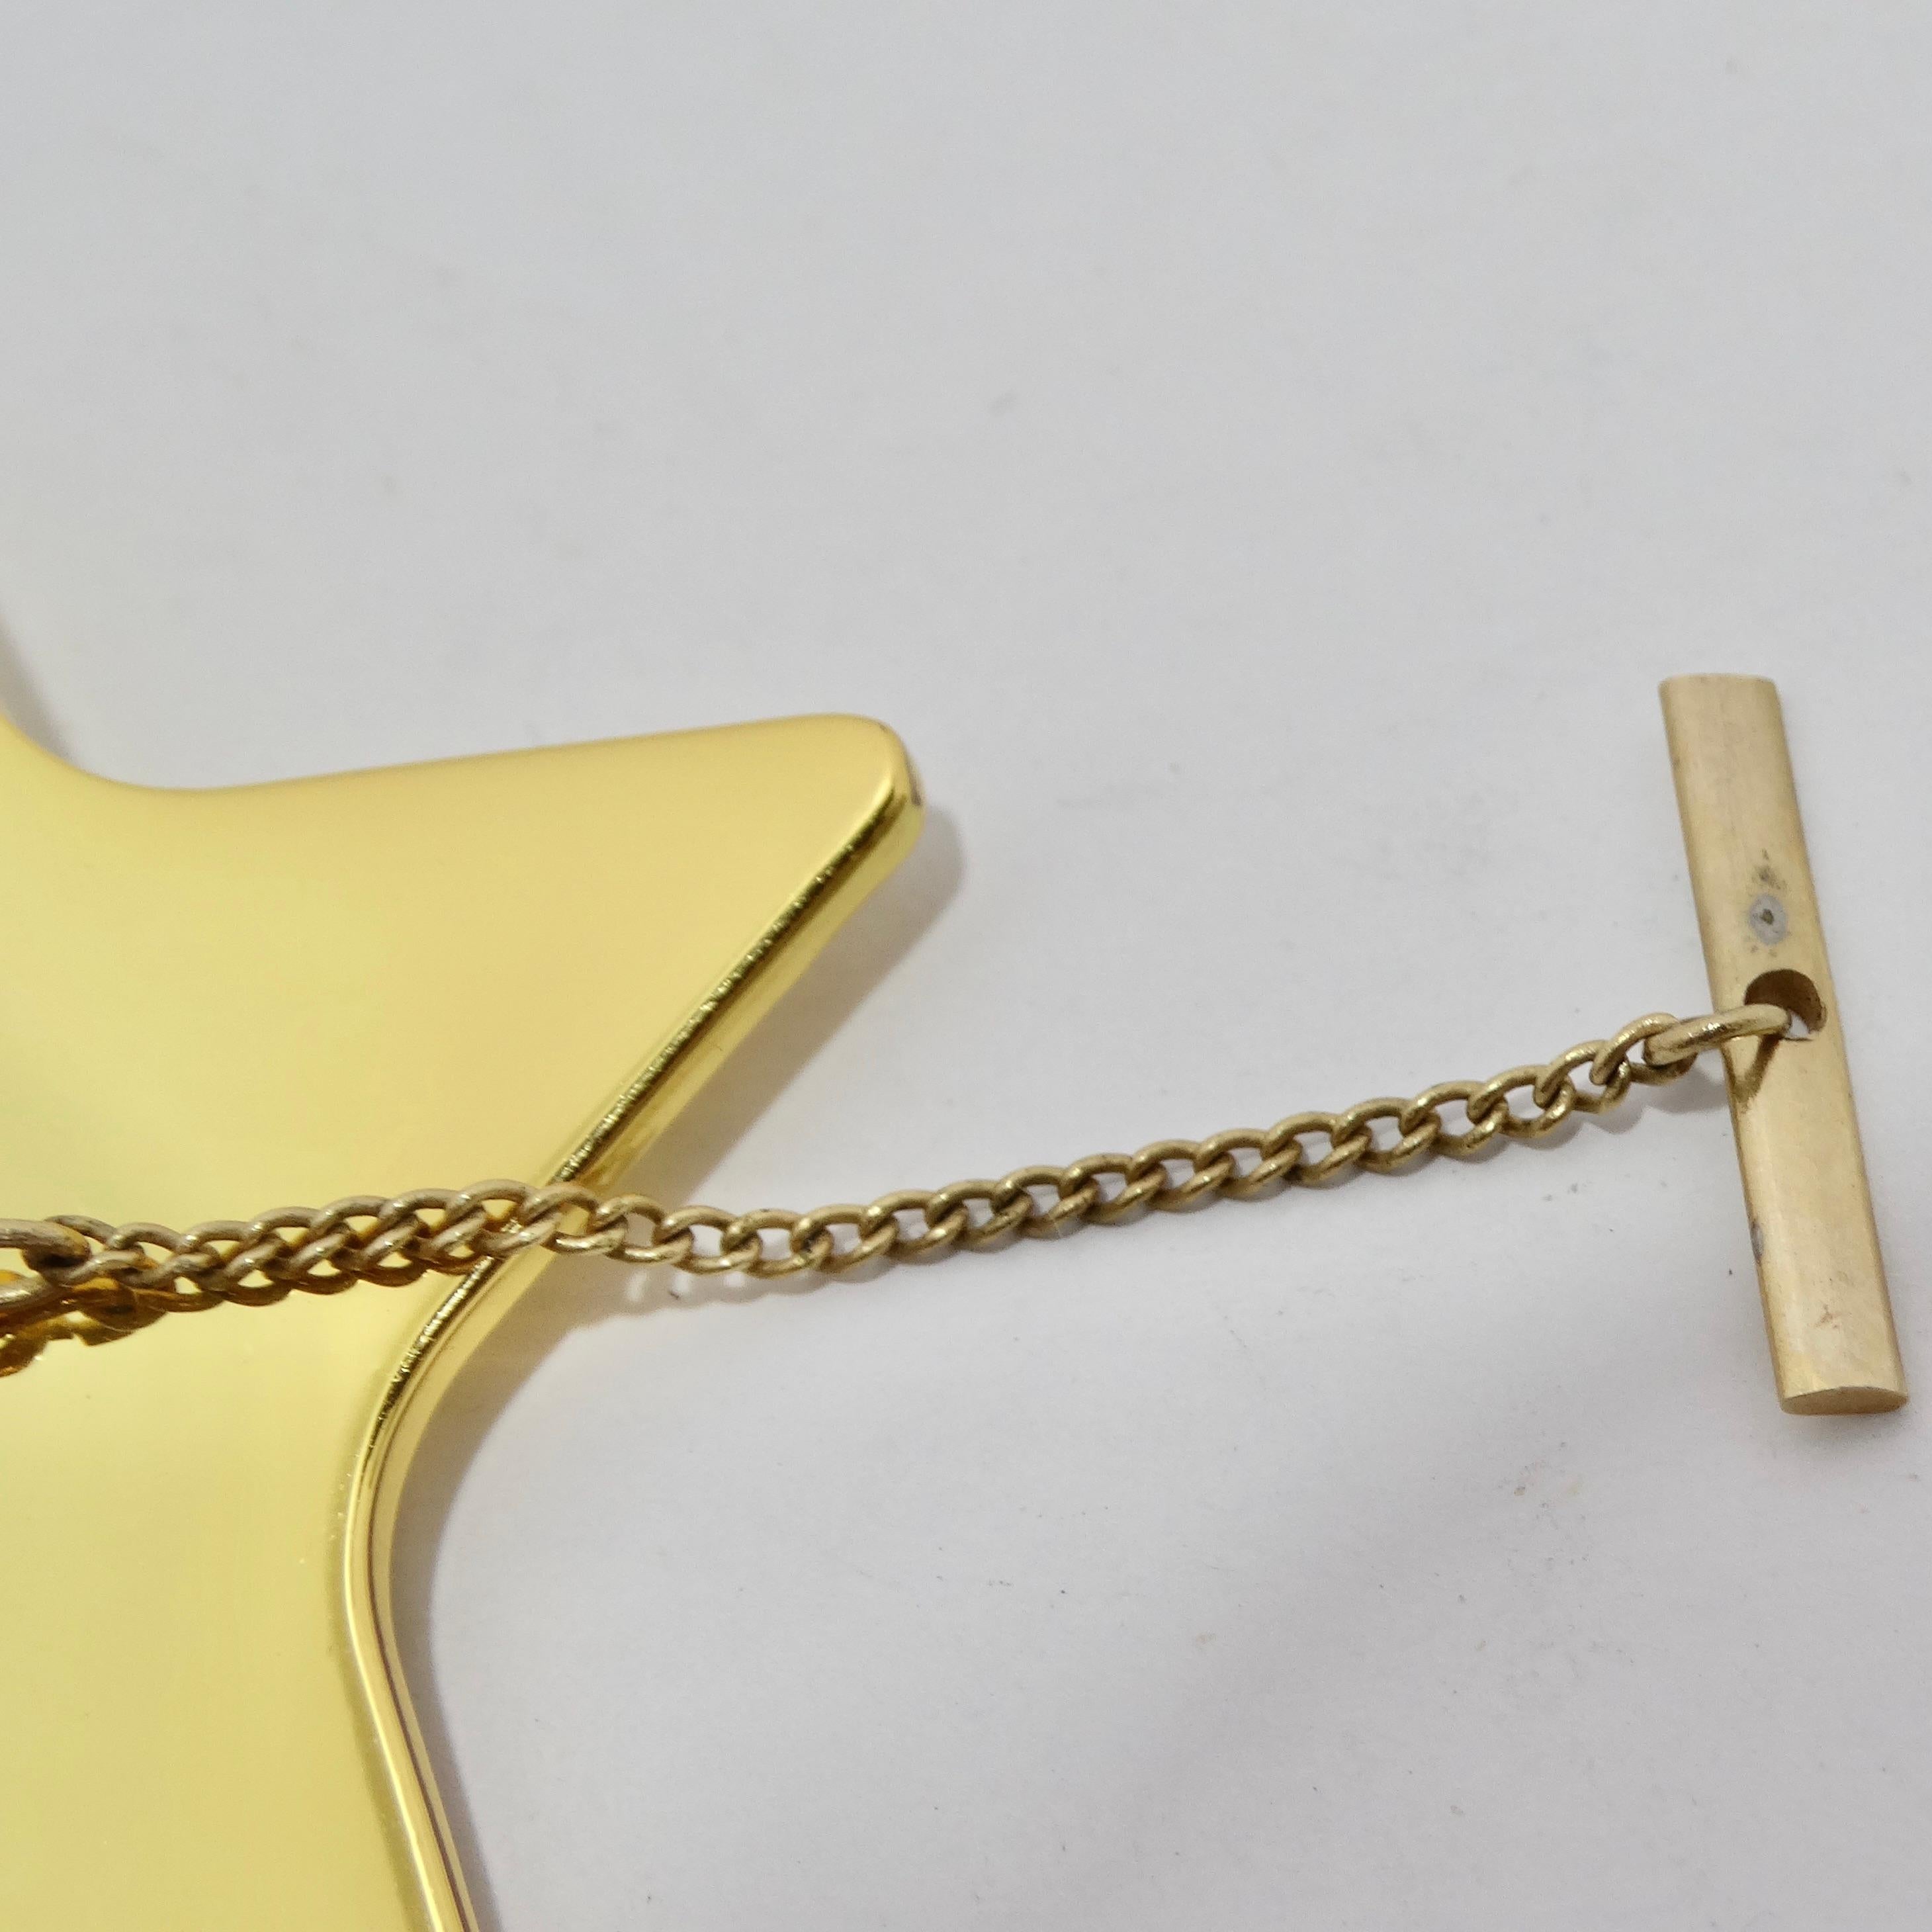 Christian Dior Gold Tone Star Pin In Excellent Condition For Sale In Scottsdale, AZ